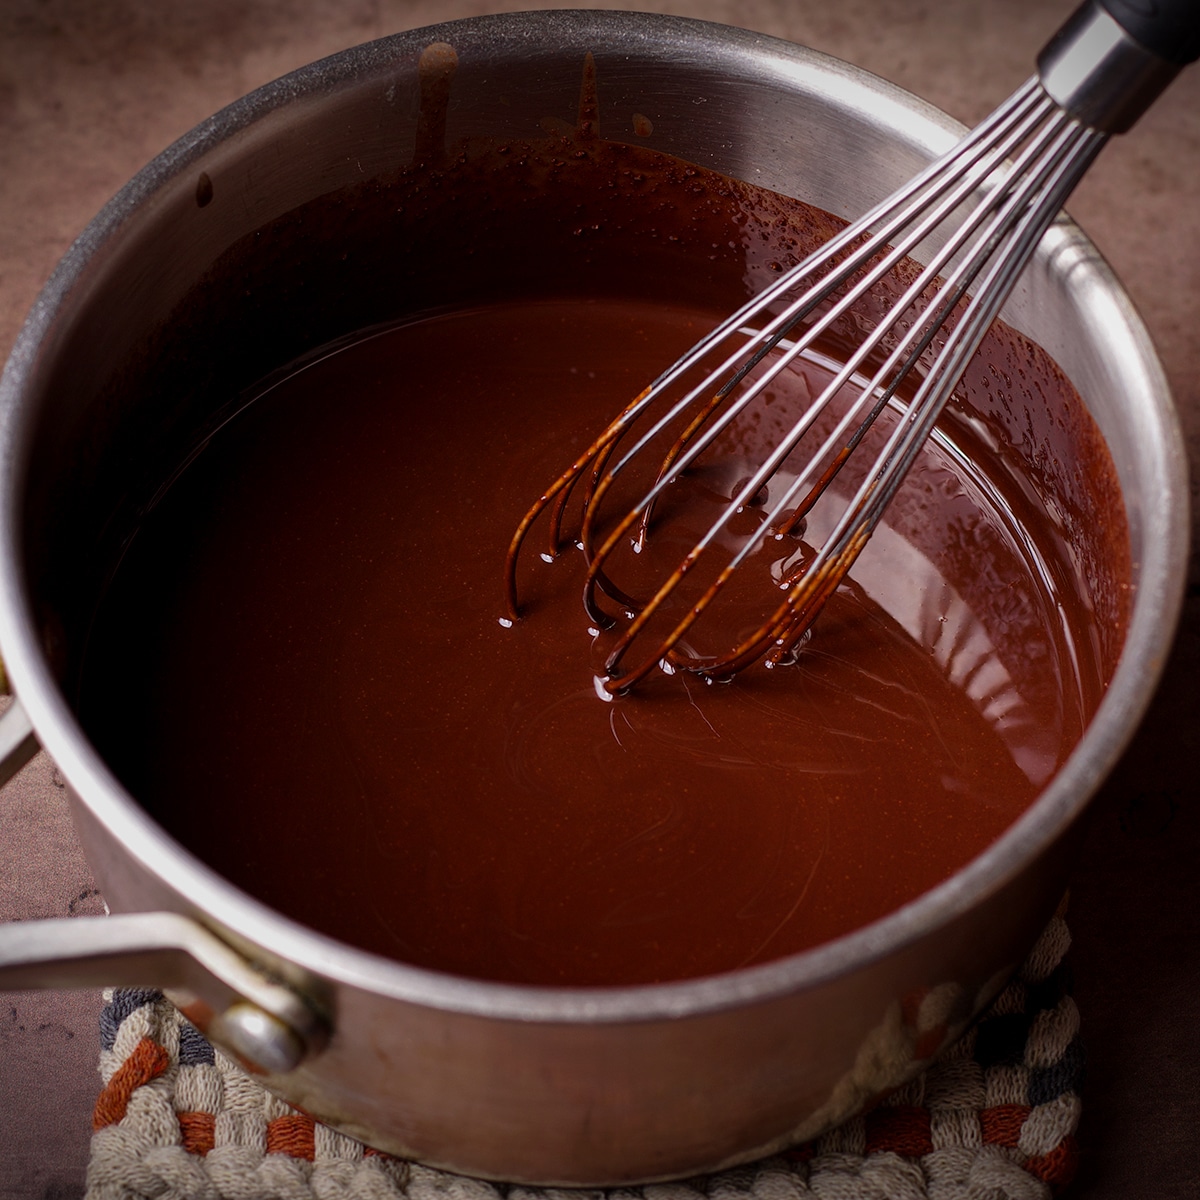 Someone using a wire whisk to stir a pan of melted chocolate.